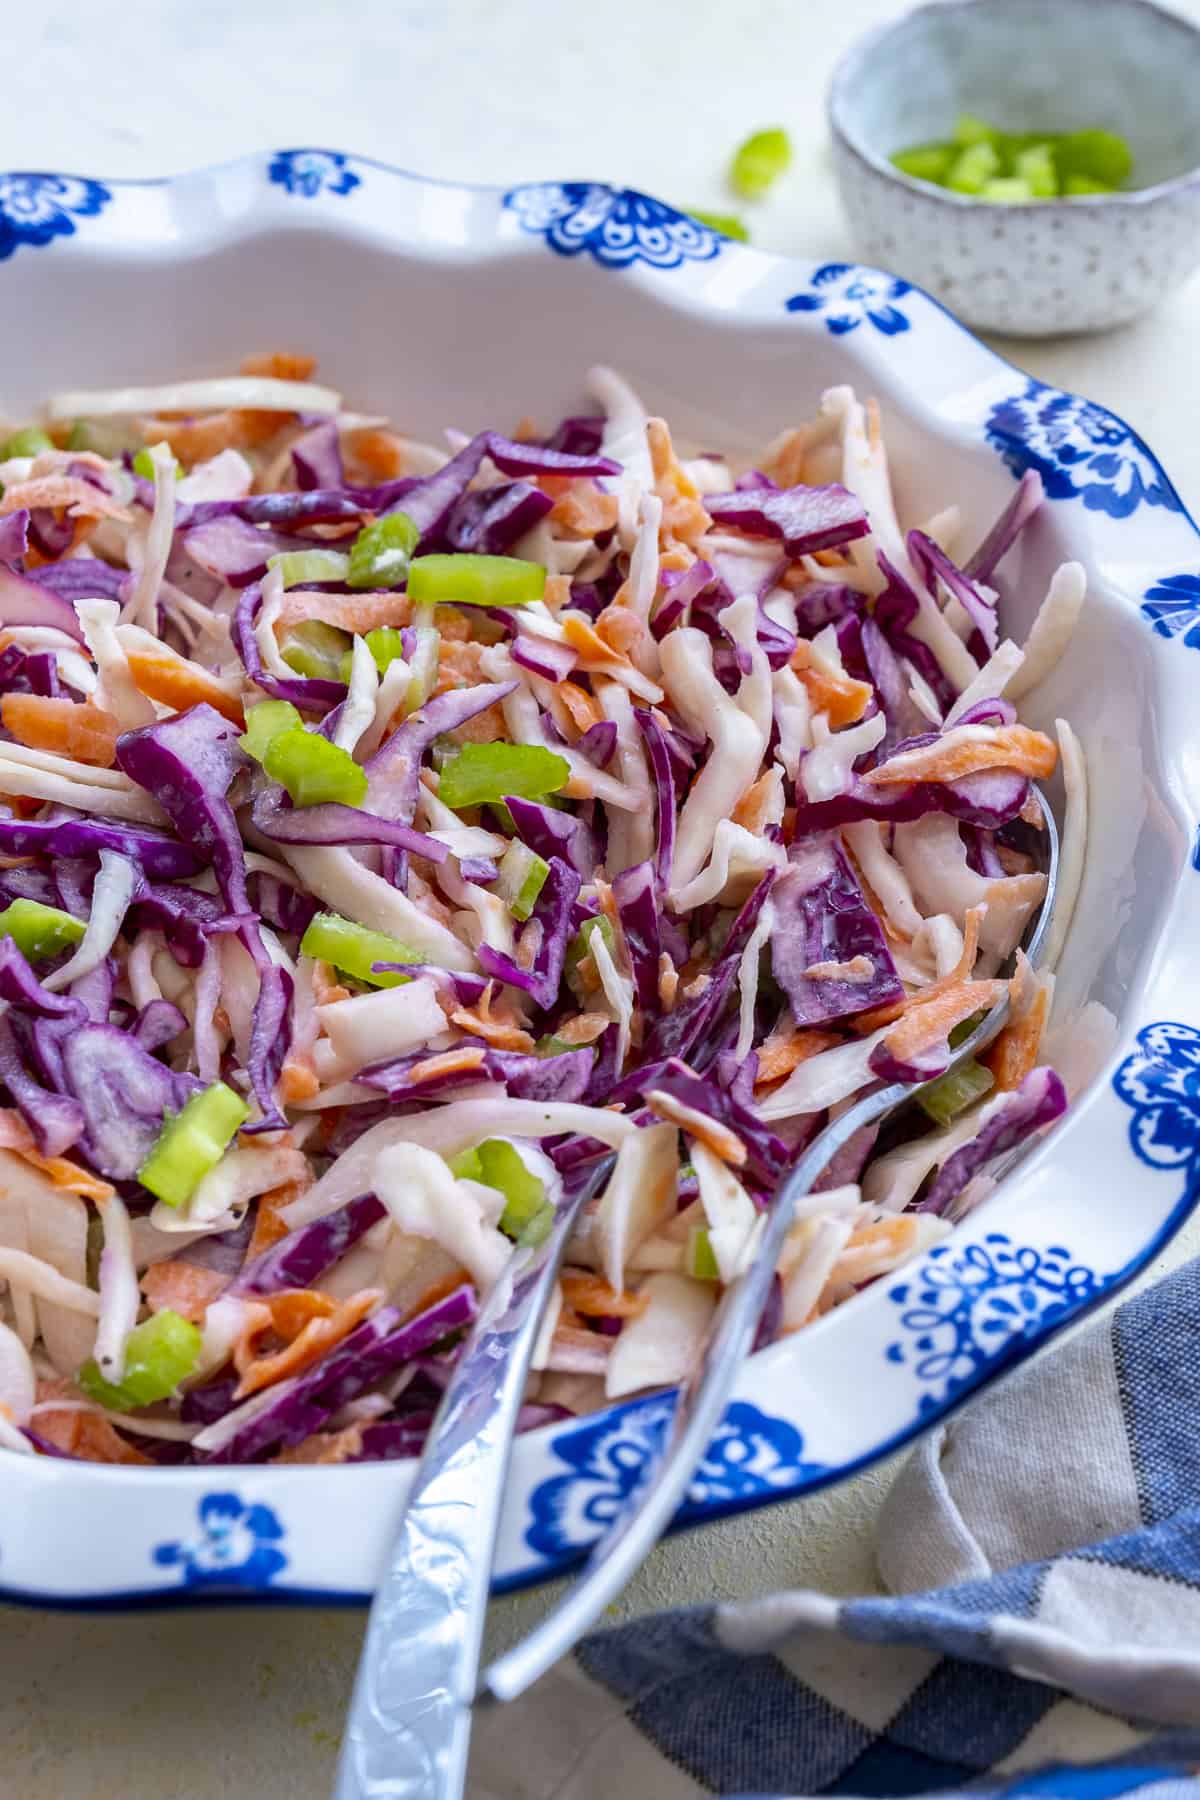 Coleslaw garnished with diced celery in a white bowl.